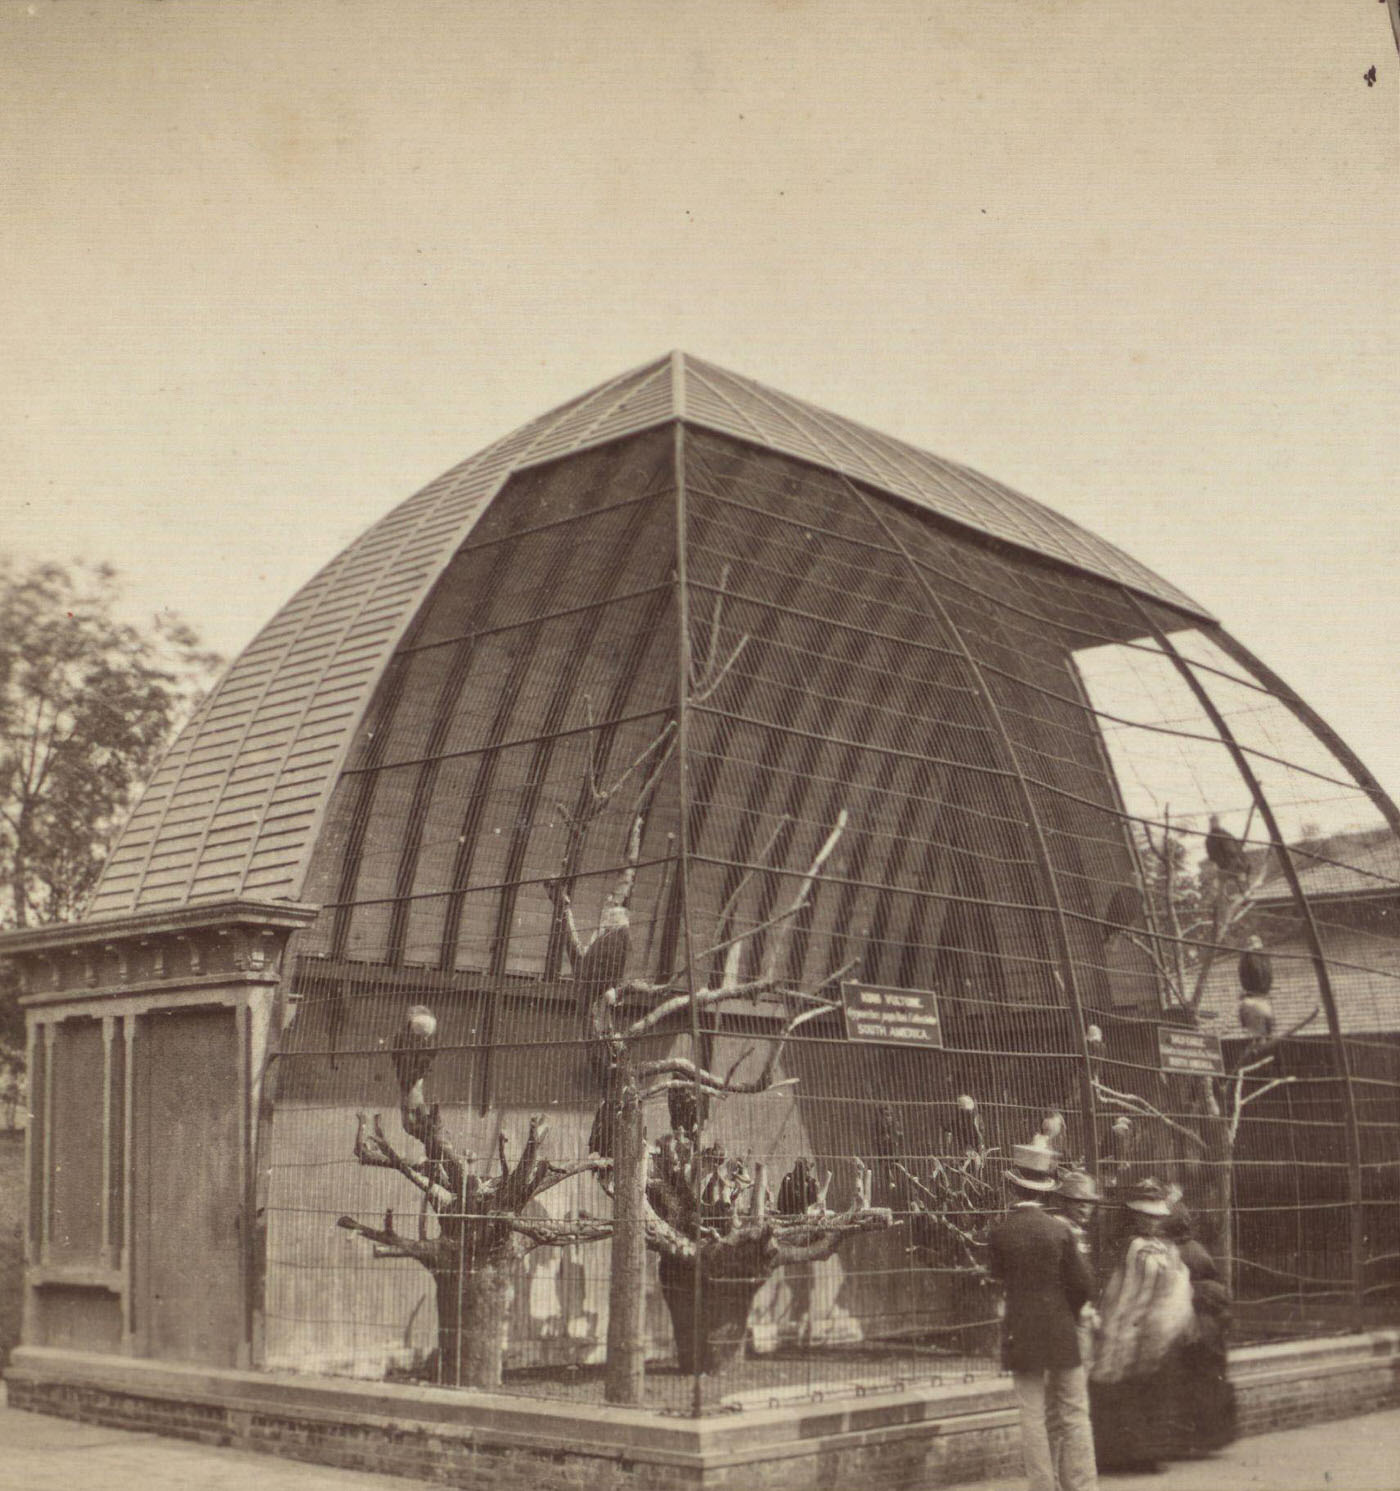 Central Park Scenery With N.y. Menagerie, Manhattan, New York City, 1870